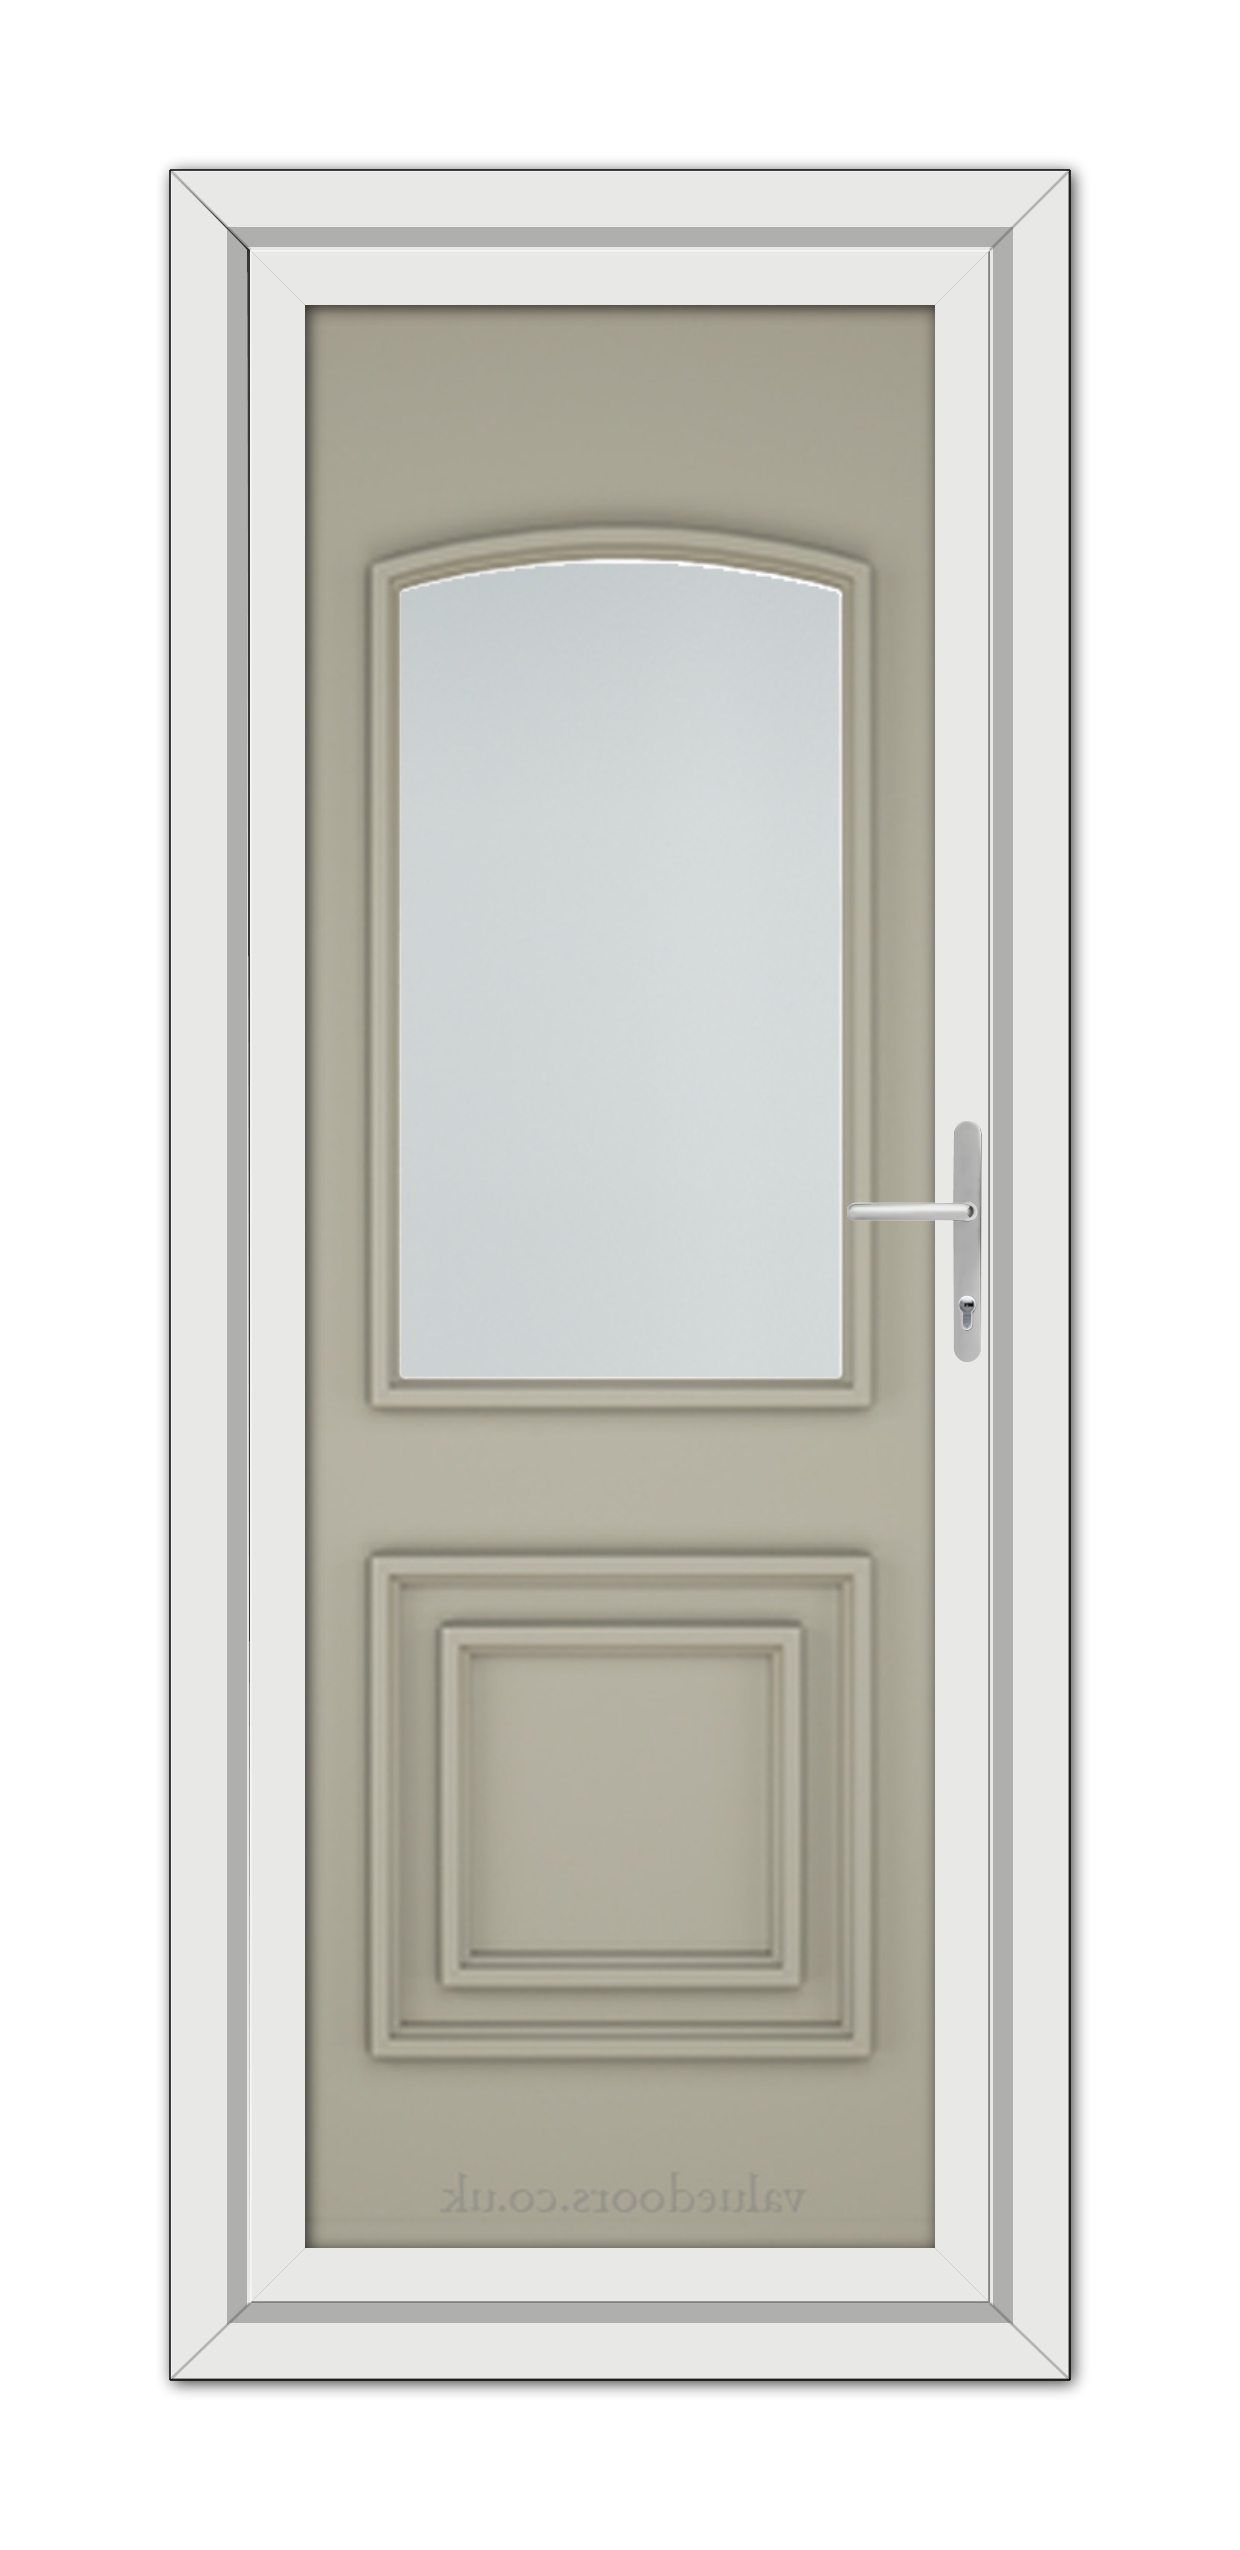 A modern Pebble Grey Balmoral Classic uPVC Door with a vertical oval glass panel and a metallic handle, set within a white frame.